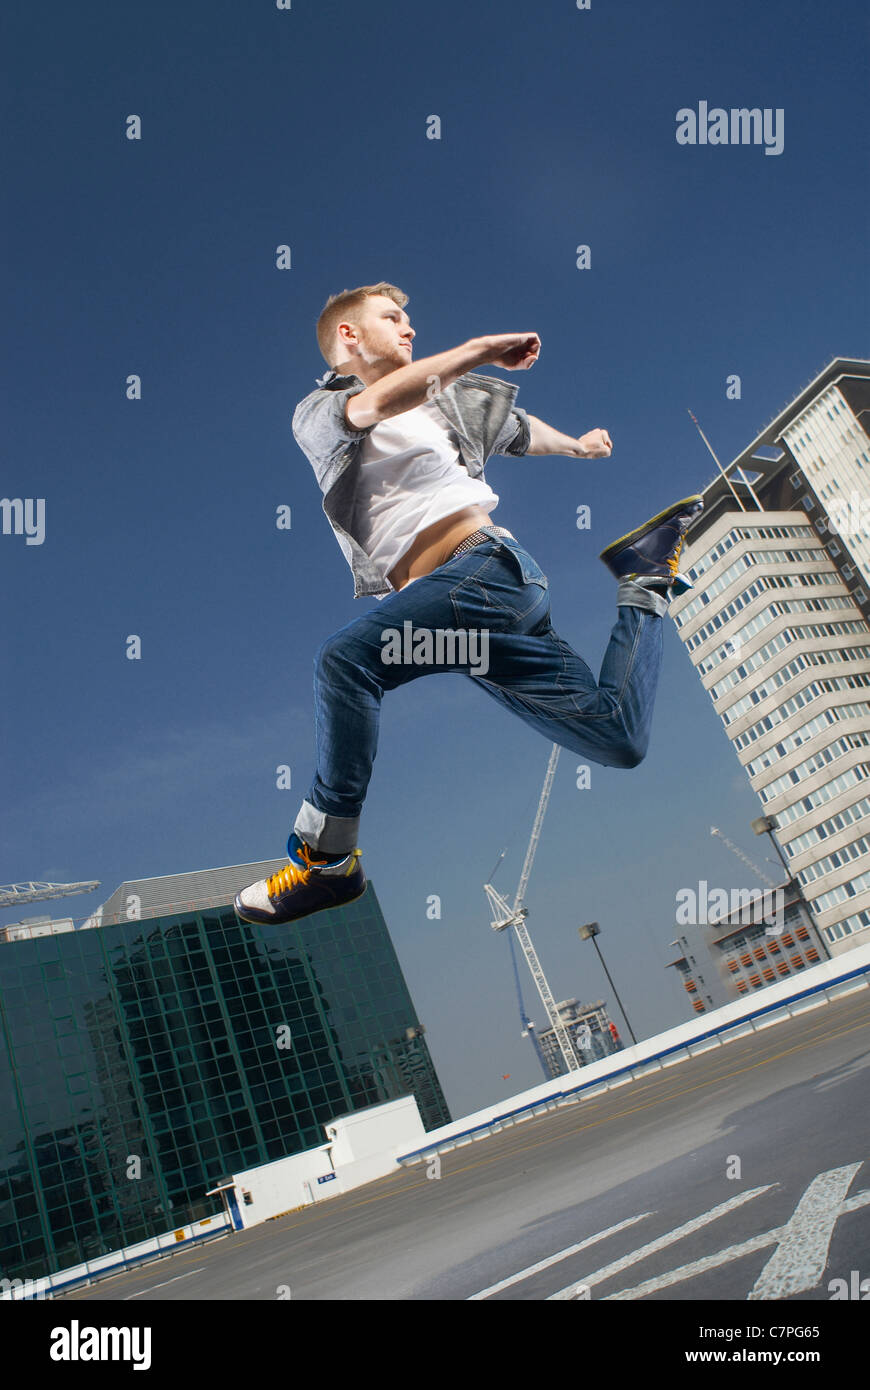 Man jumping on urban rooftop Stock Photo